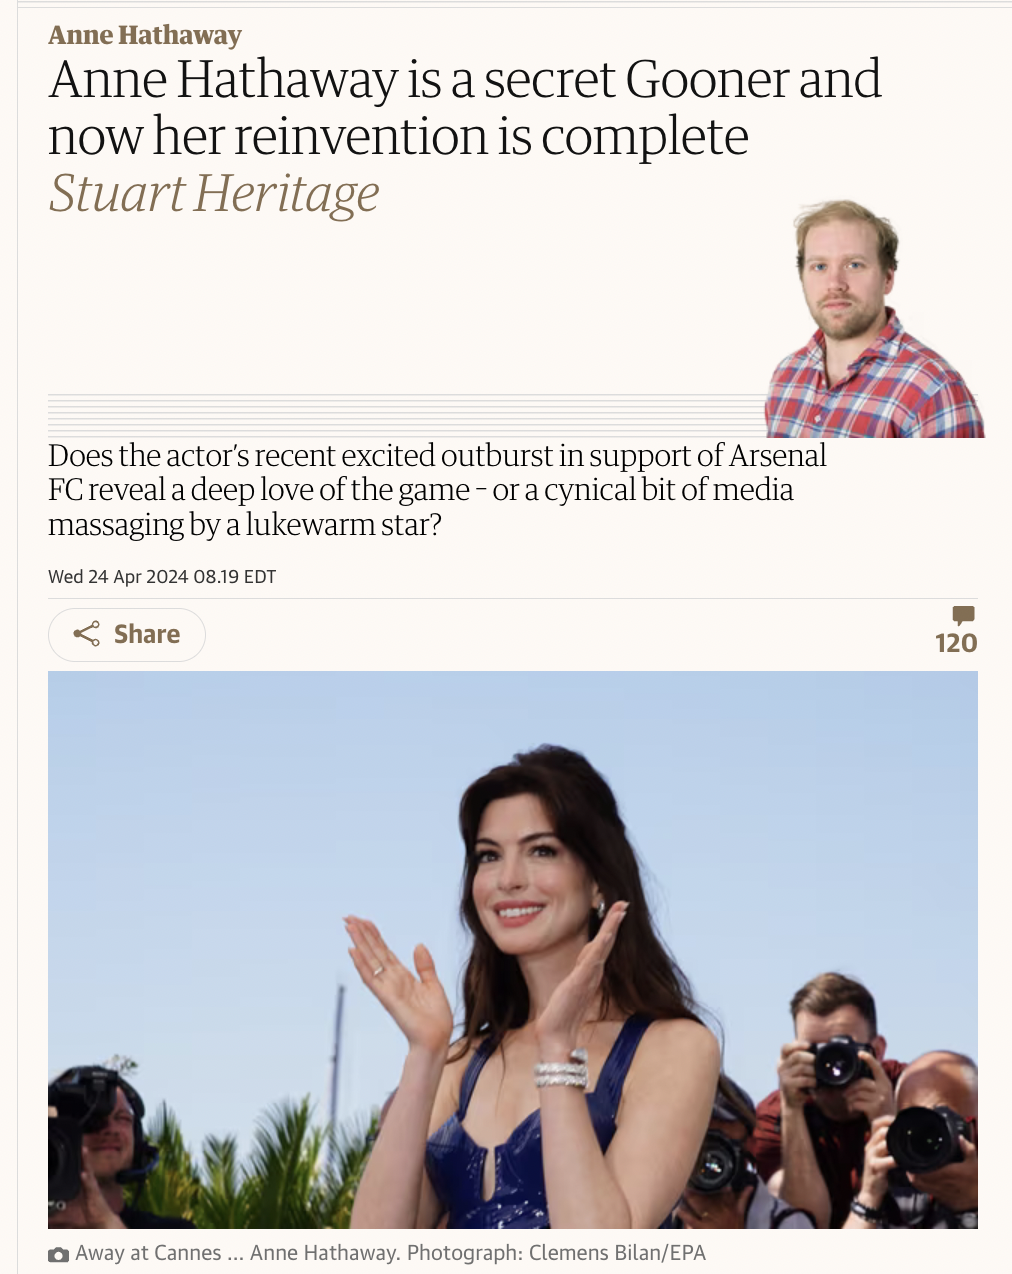 anne hathaway arsenal - Anne Hathaway Anne Hathaway is a secret Gooner and now her reinvention is complete Stuart Heritage Does the actor's recent excited outburst in support of Arsenal Fc reveal a deep love of the gameor a cynical bit of media massaging 